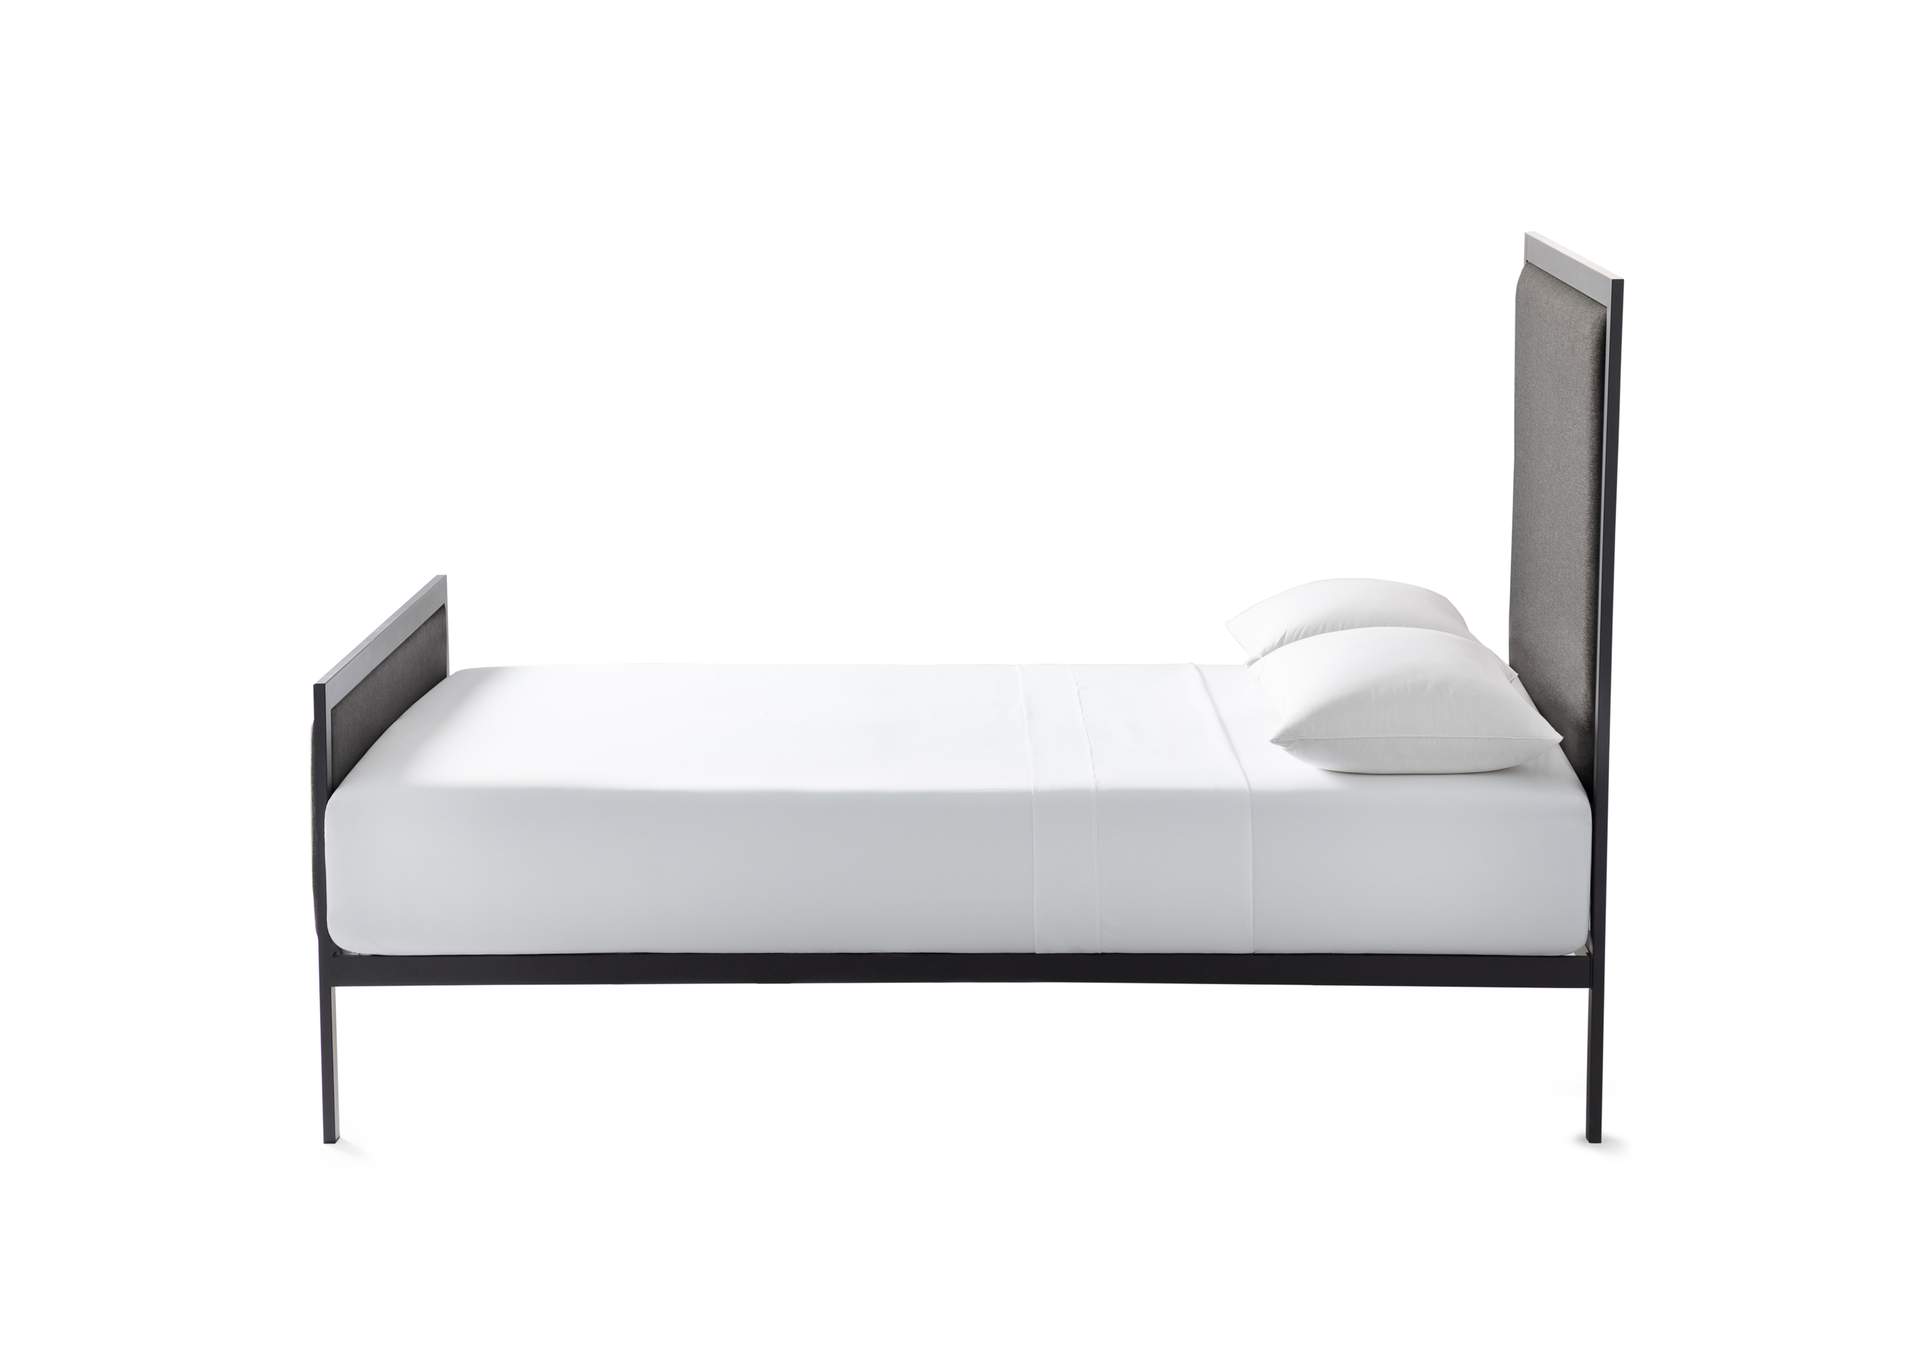 Malouf Oat Clarke Metal Upholstered Queen Bed,Malouf